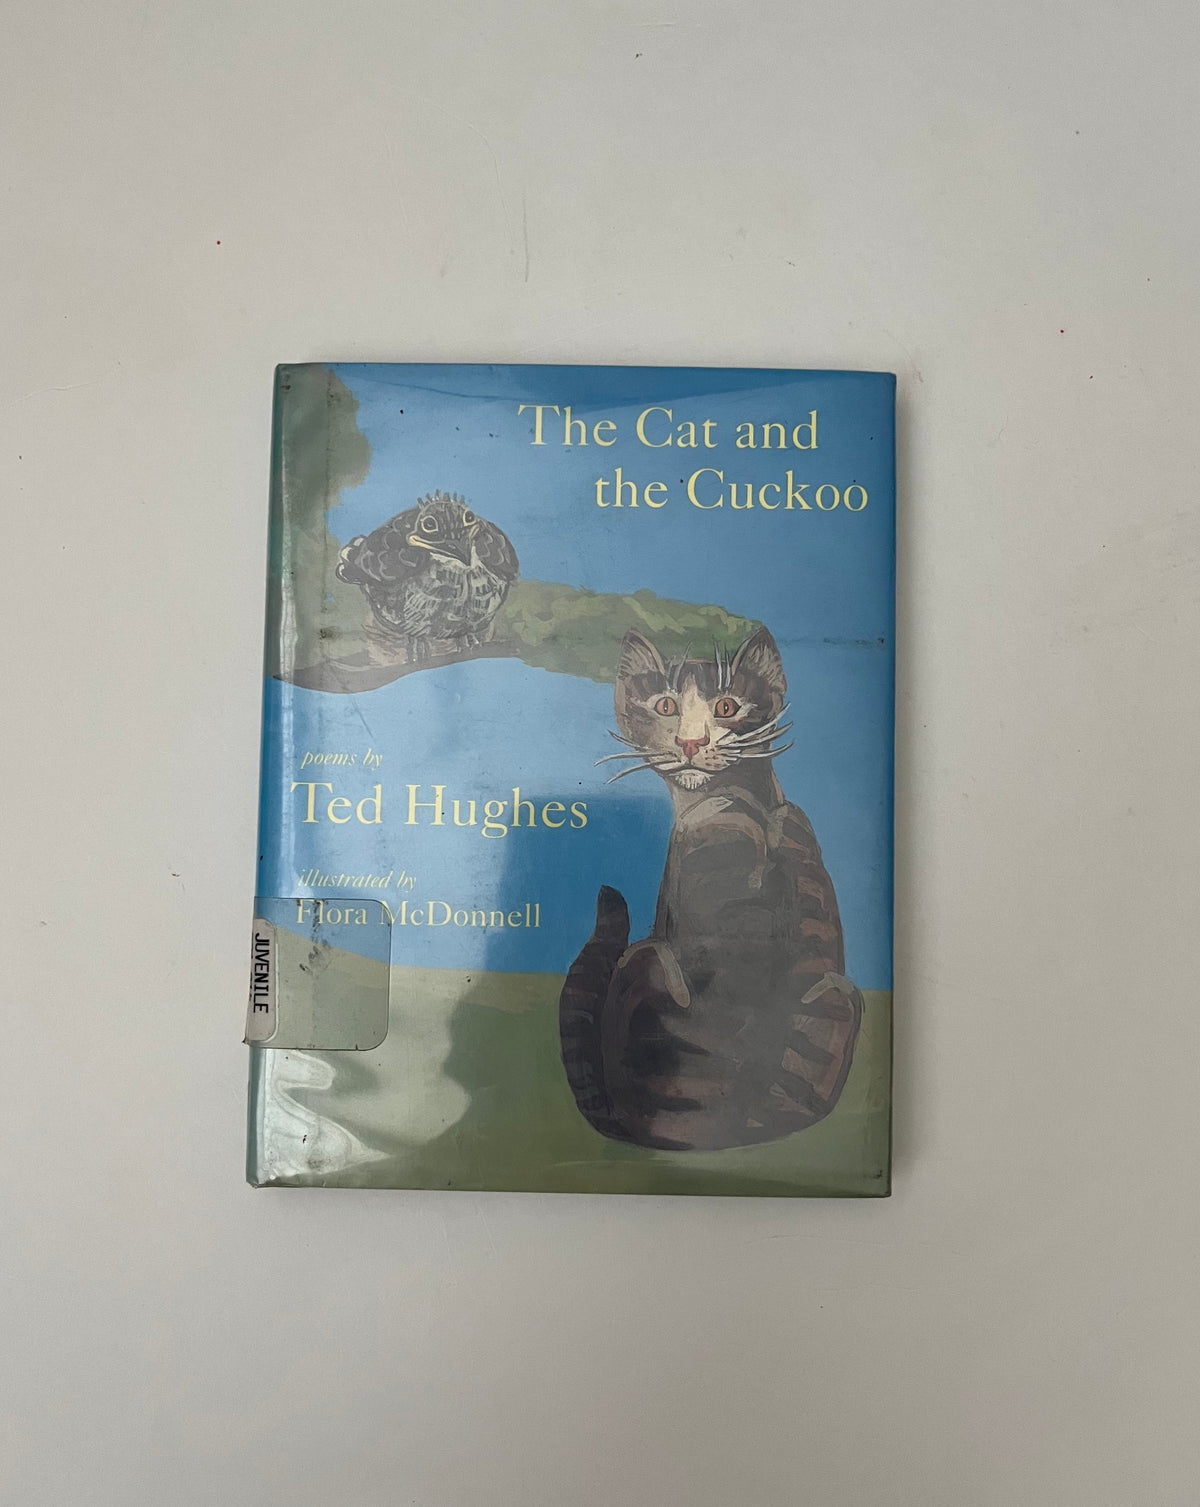 The Cat and the Cuckoo by Ted Hughes